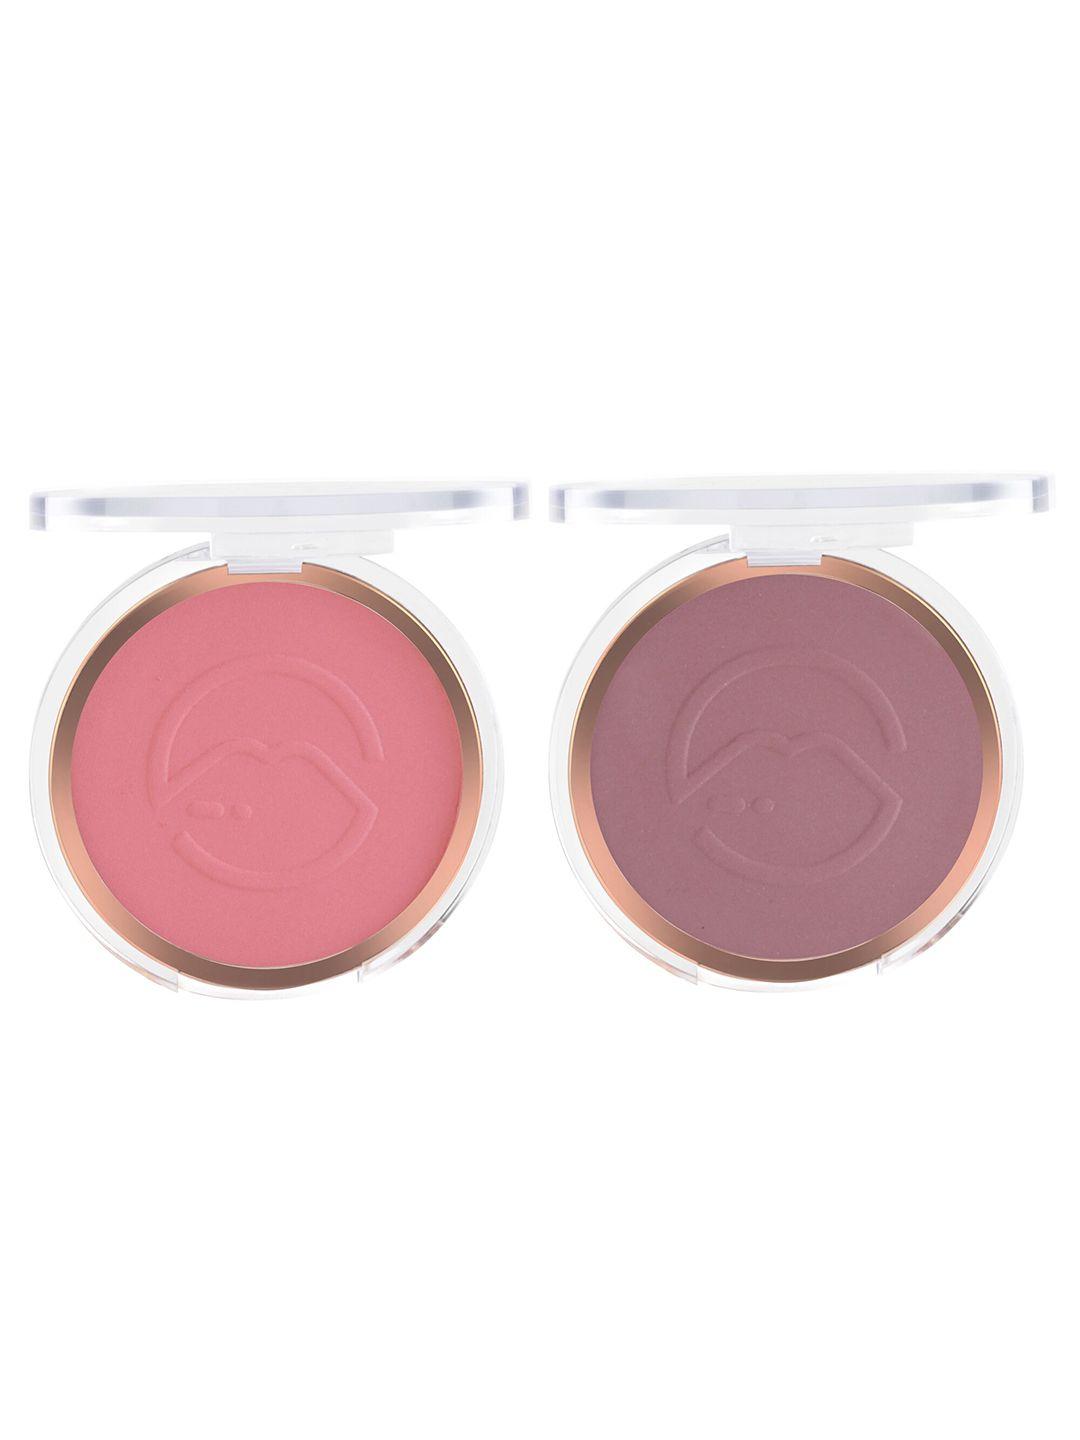 mars-set-of-2-flush-of-love-highly-pigmented-matte-face-blusher---shade-03-&-04